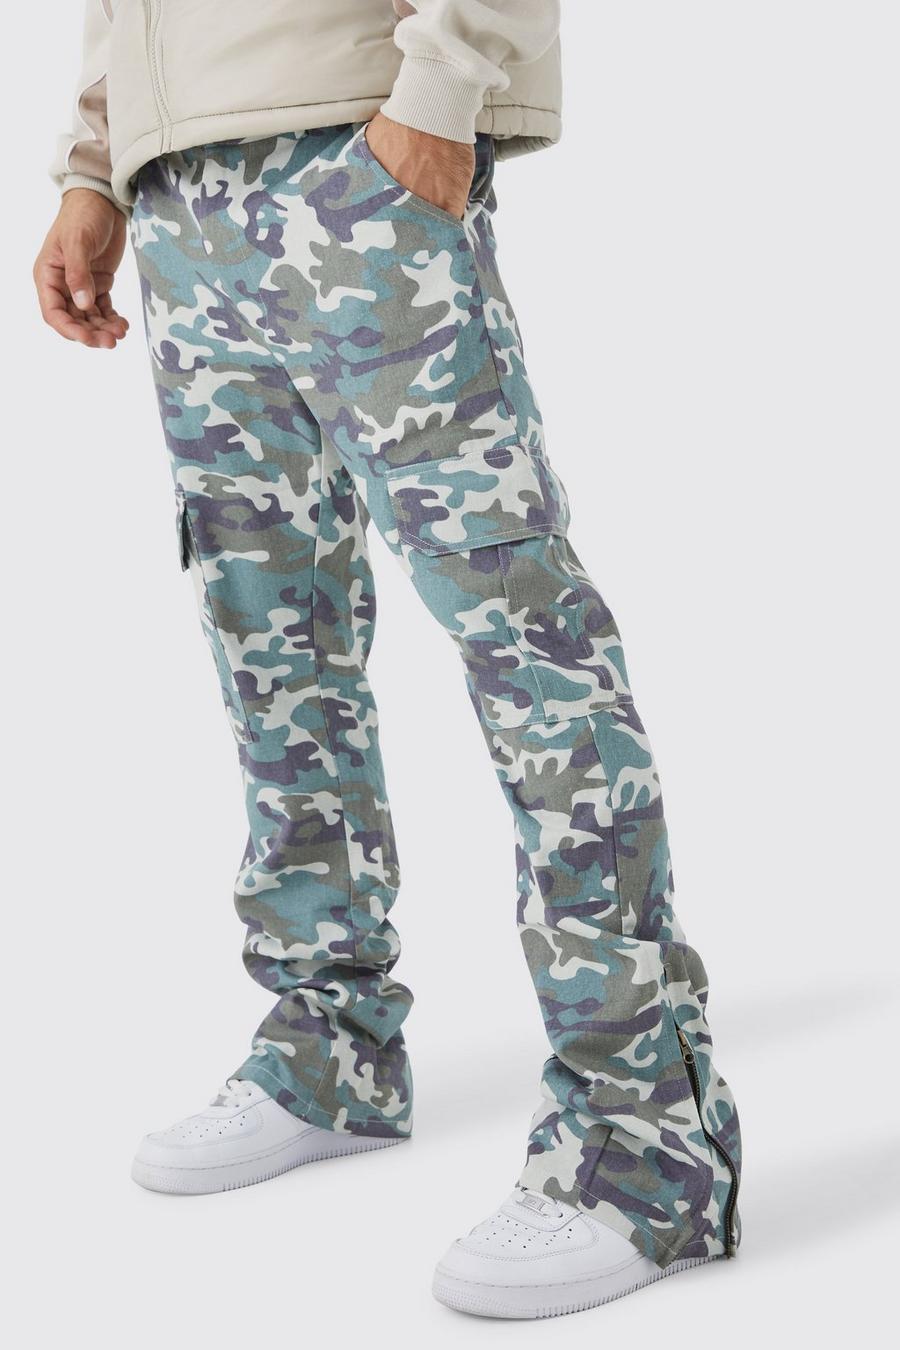 Sand beis Fixed Waist Slim Flare Washed Camo Gusset Trouser